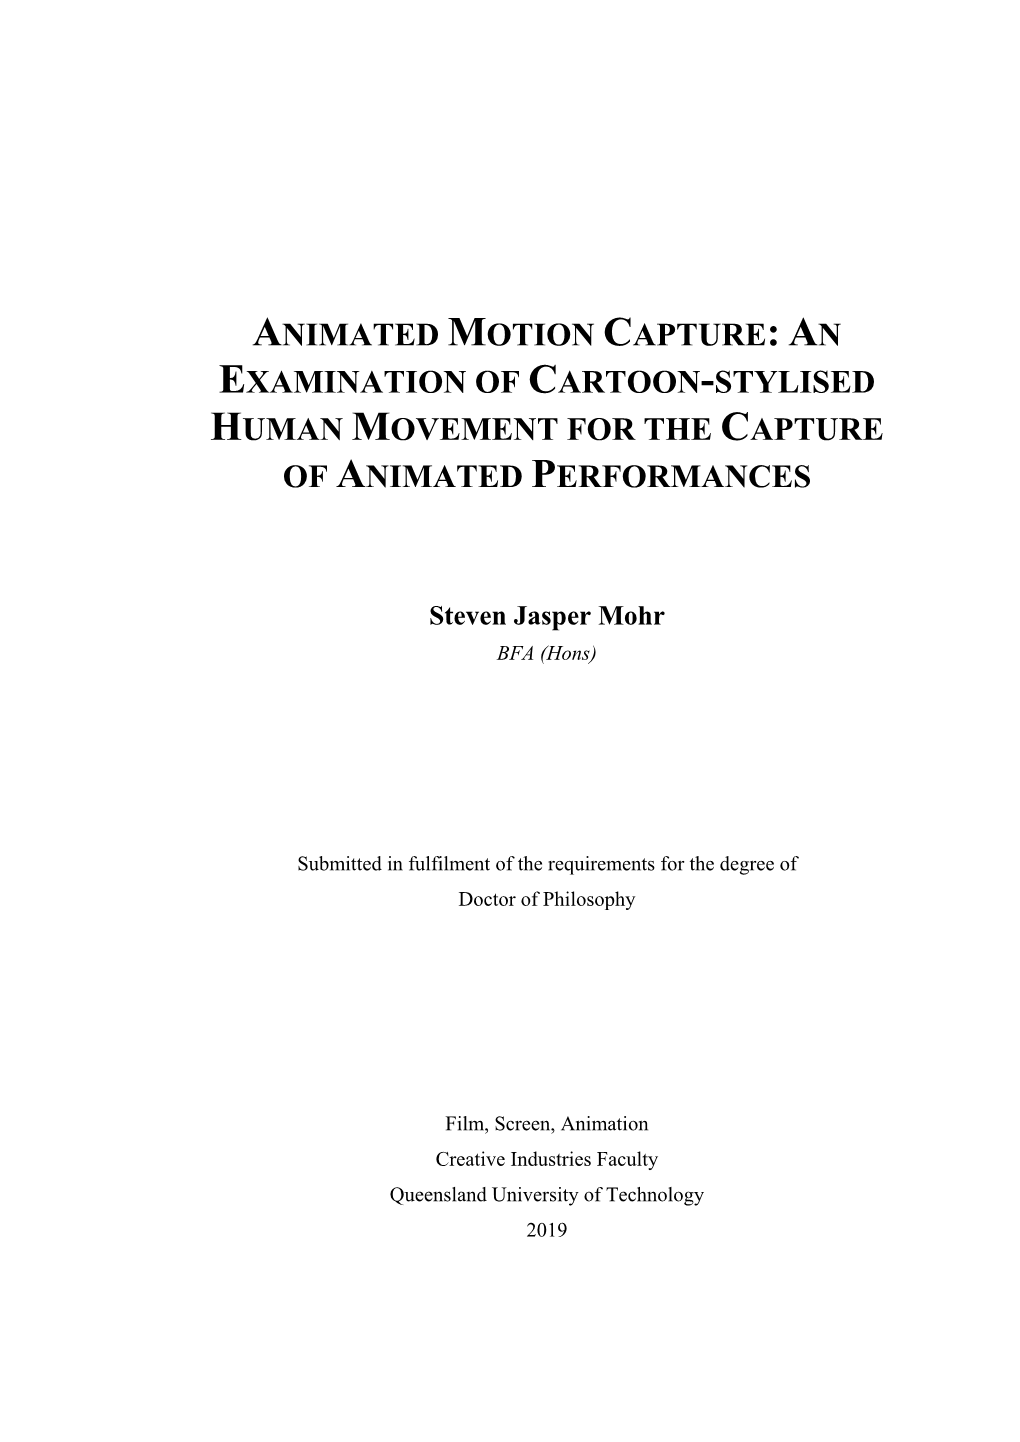 Animated Motion Capture: an Examination of Cartoon-Stylised Human Movement for the Capture of Animated Performances